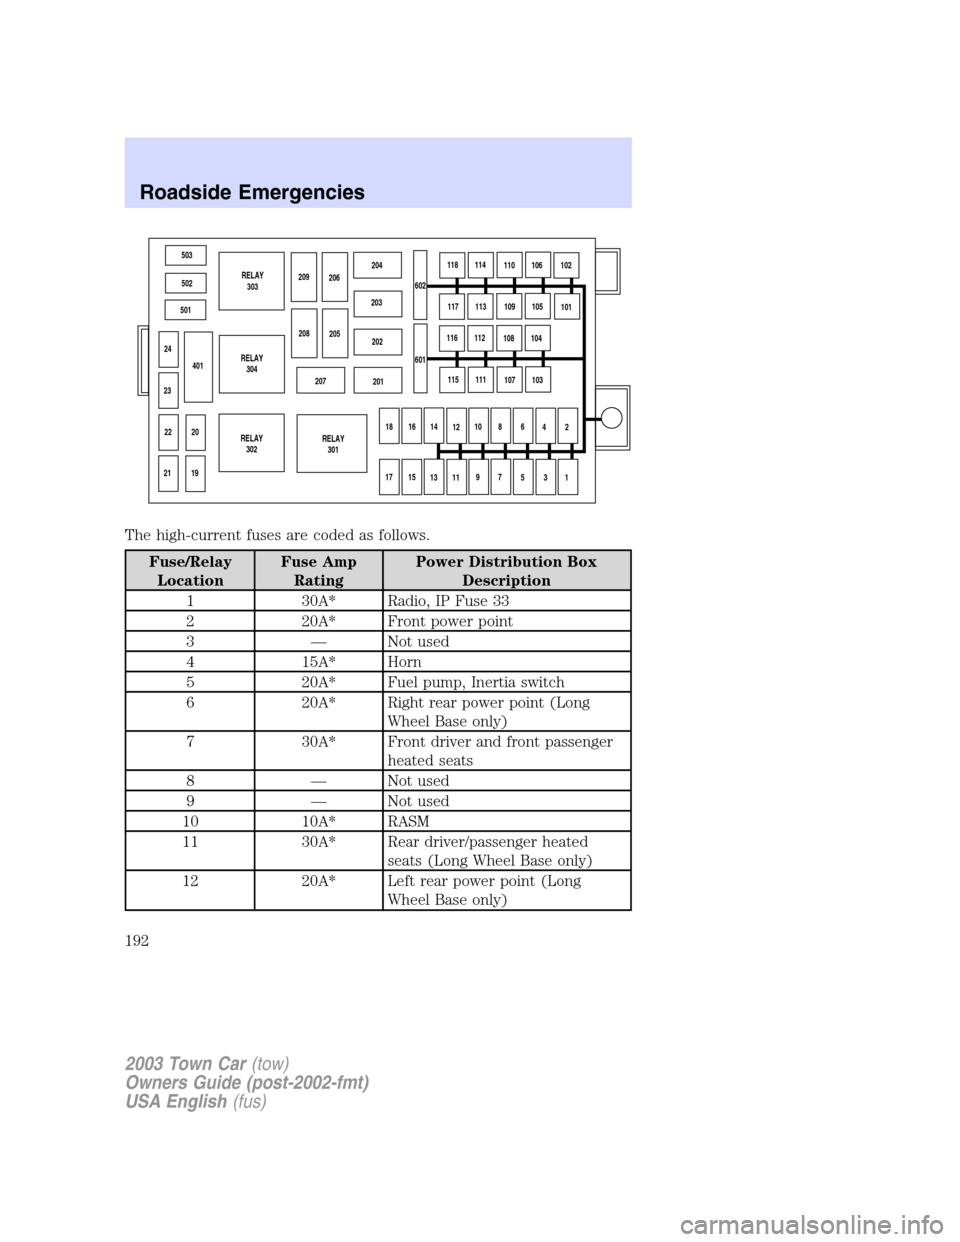 LINCOLN TOWN CAR 2003 User Guide The high-current fuses are coded as follows.
Fuse/Relay
LocationFuse Amp
RatingPower Distribution Box
Description
1 30A* Radio, IP Fuse 33
2 20A* Front power point
3—Not used
4 15A* Horn
5 20A* Fuel